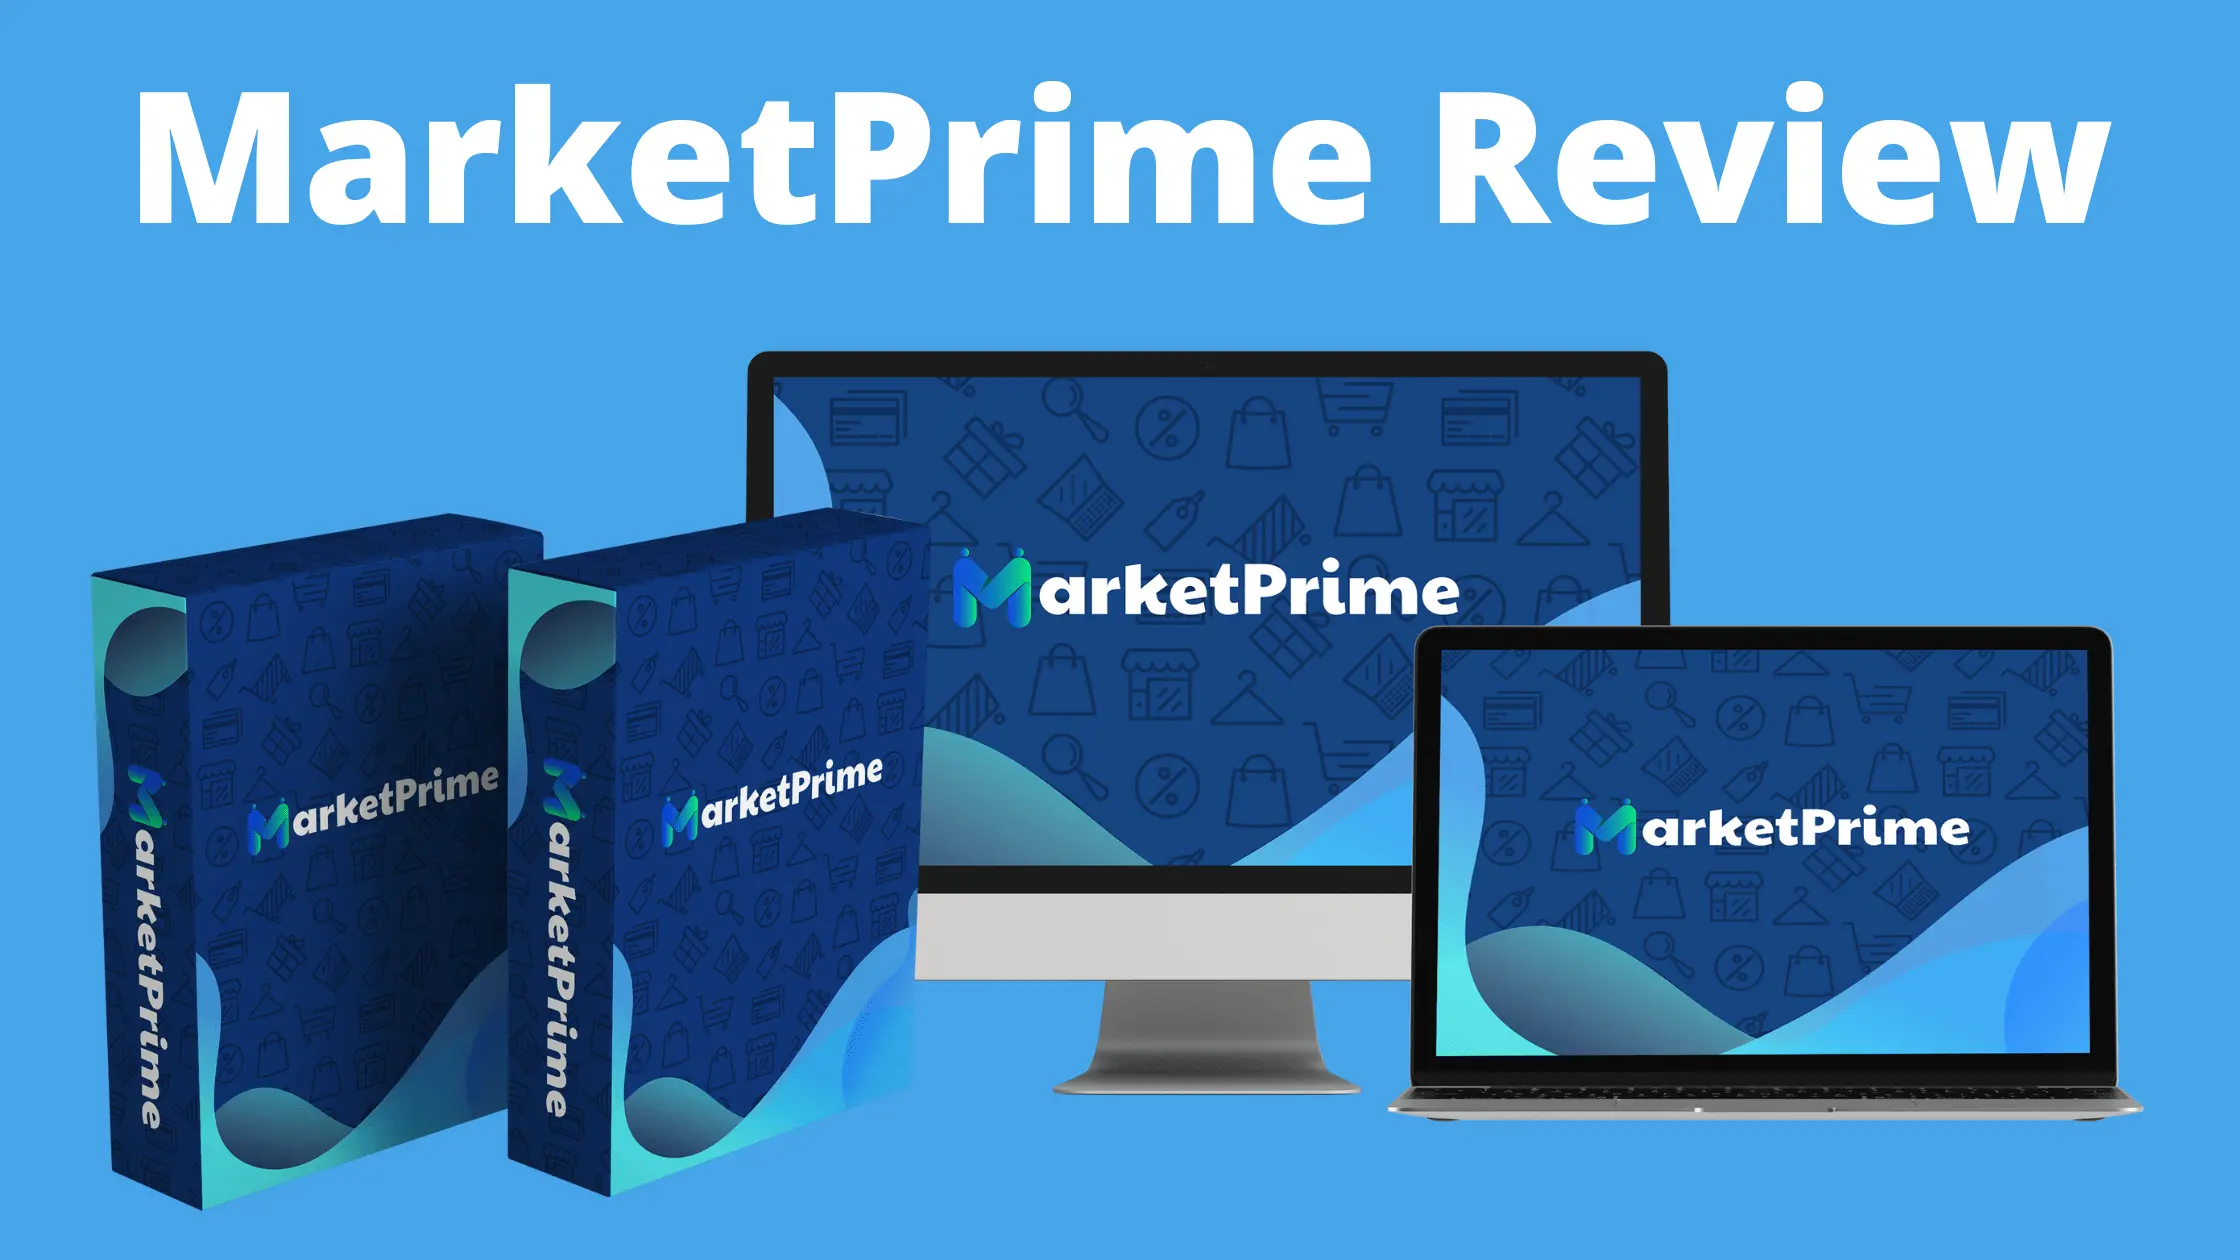 MarketPrime Review